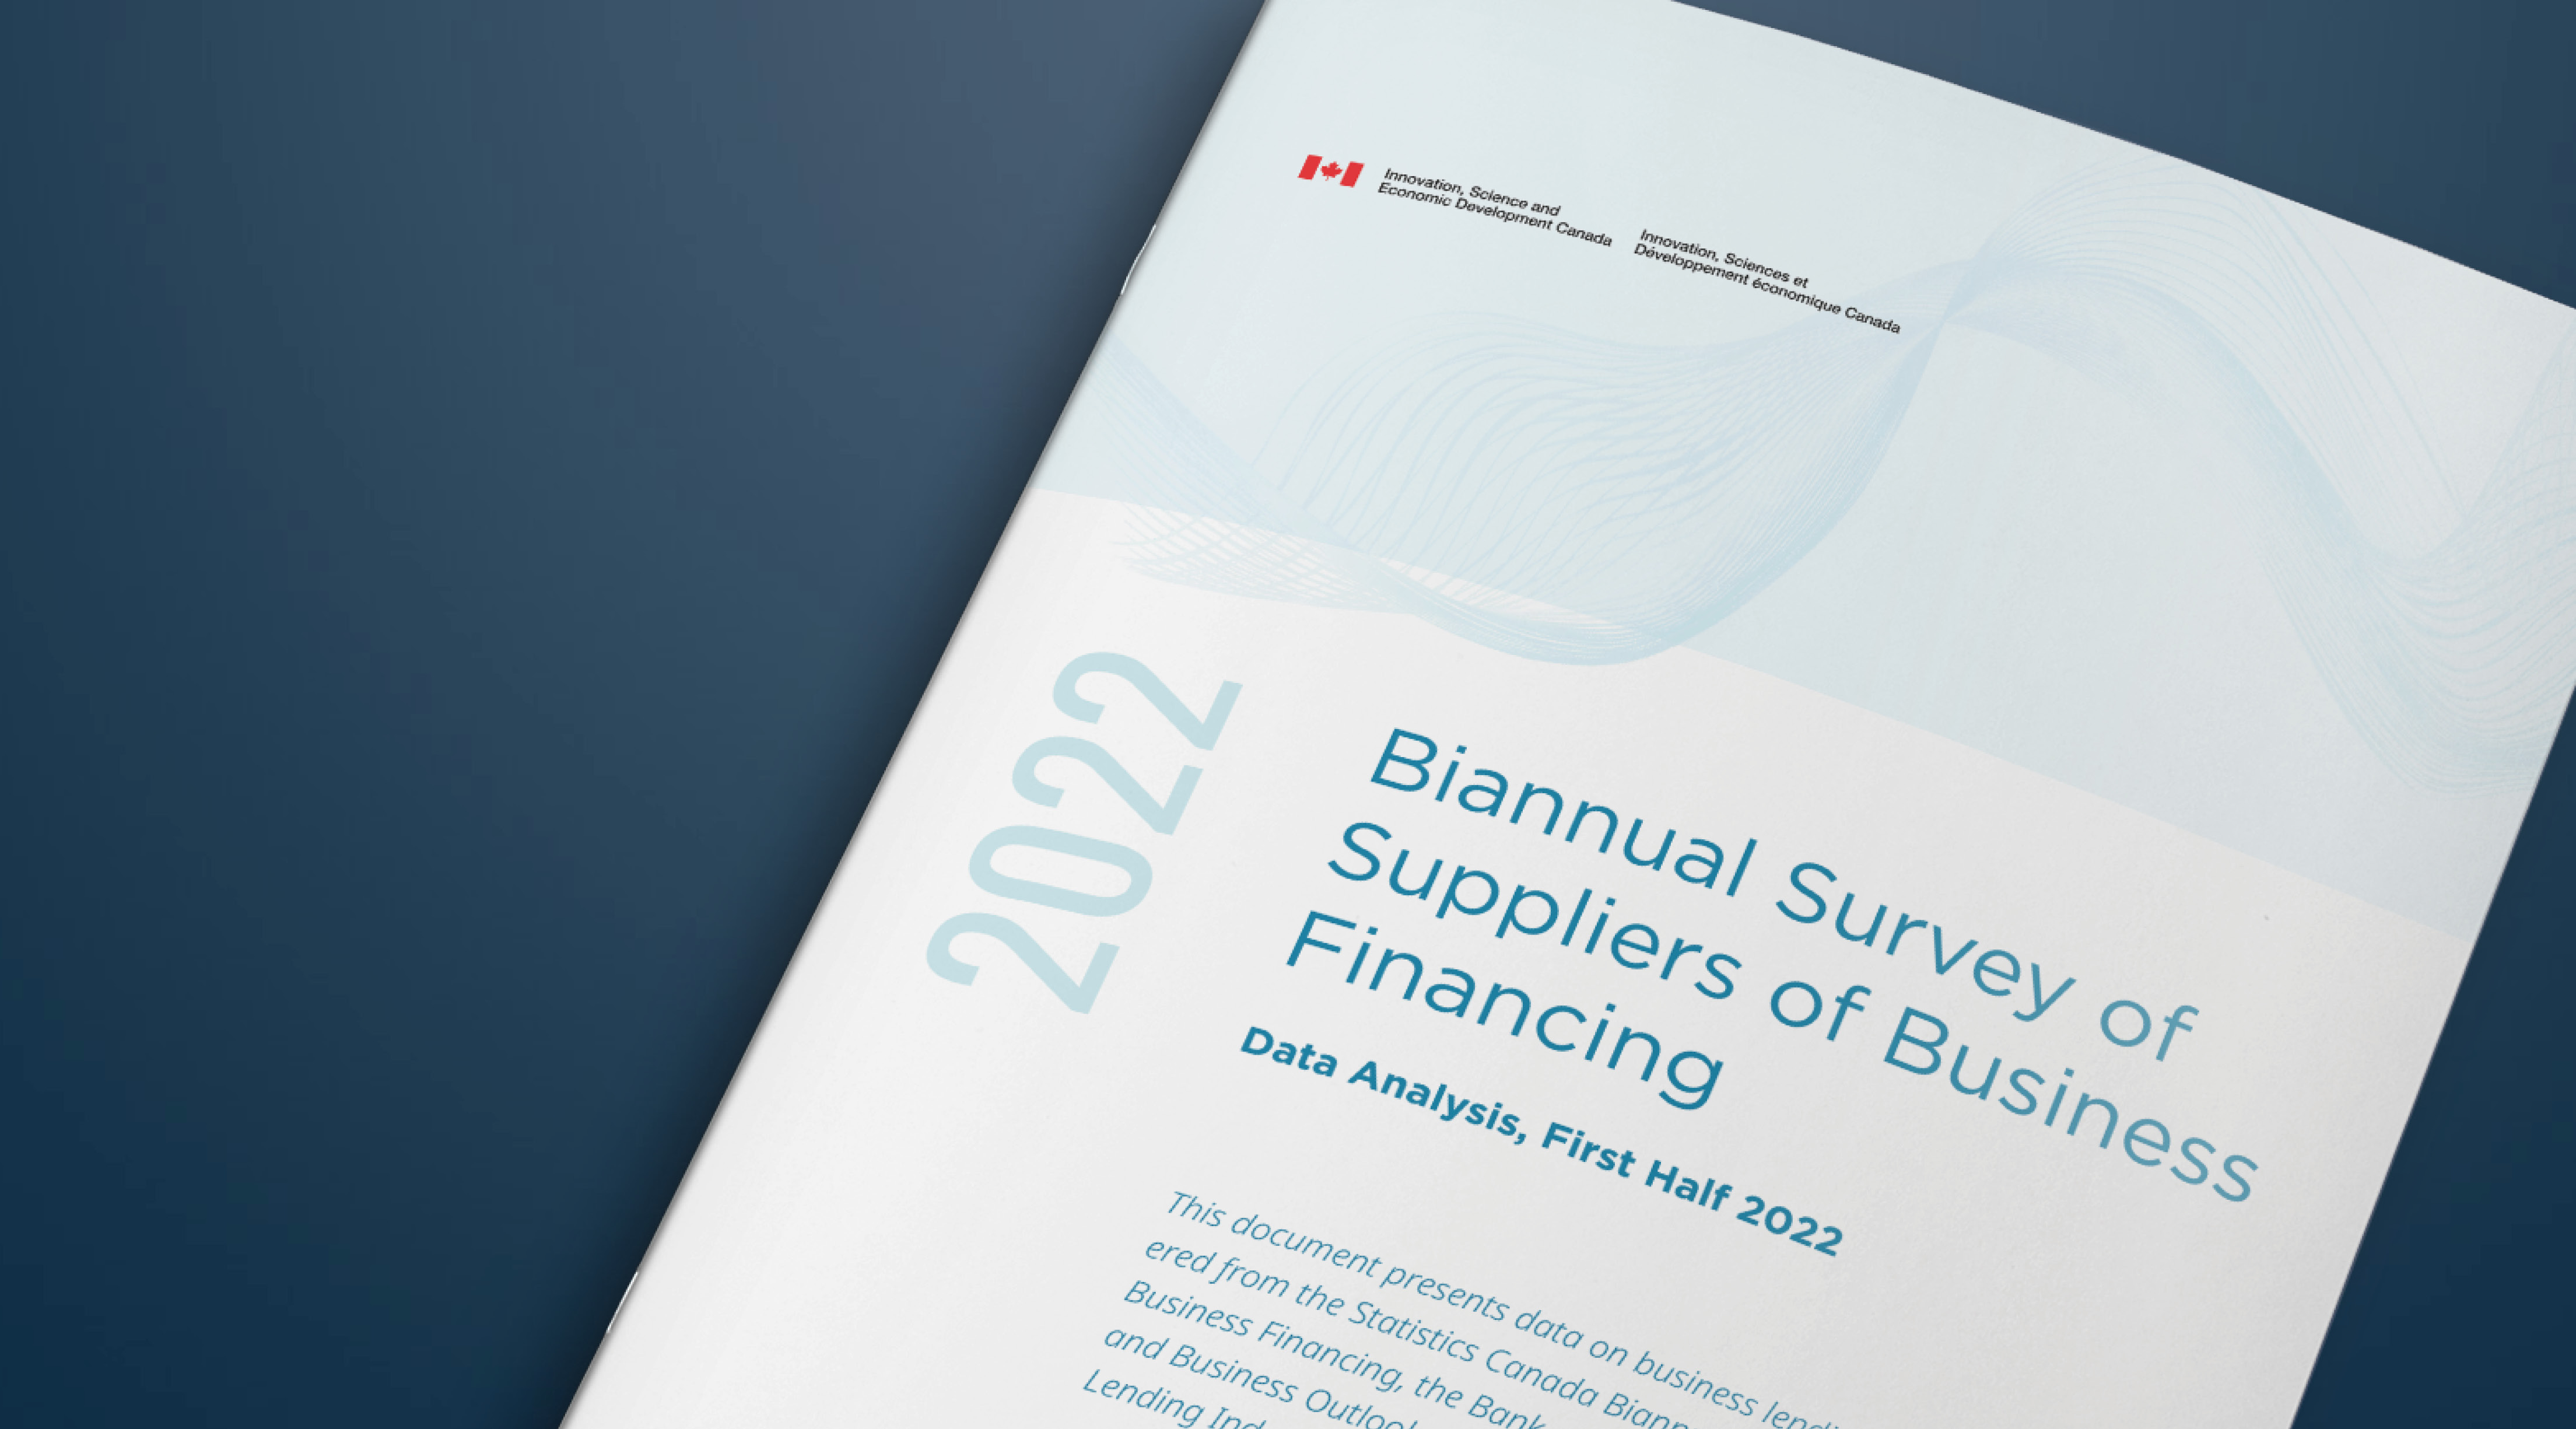 Biannual Survey of Suppliers of Business Financing — Data analysis, first half 2022